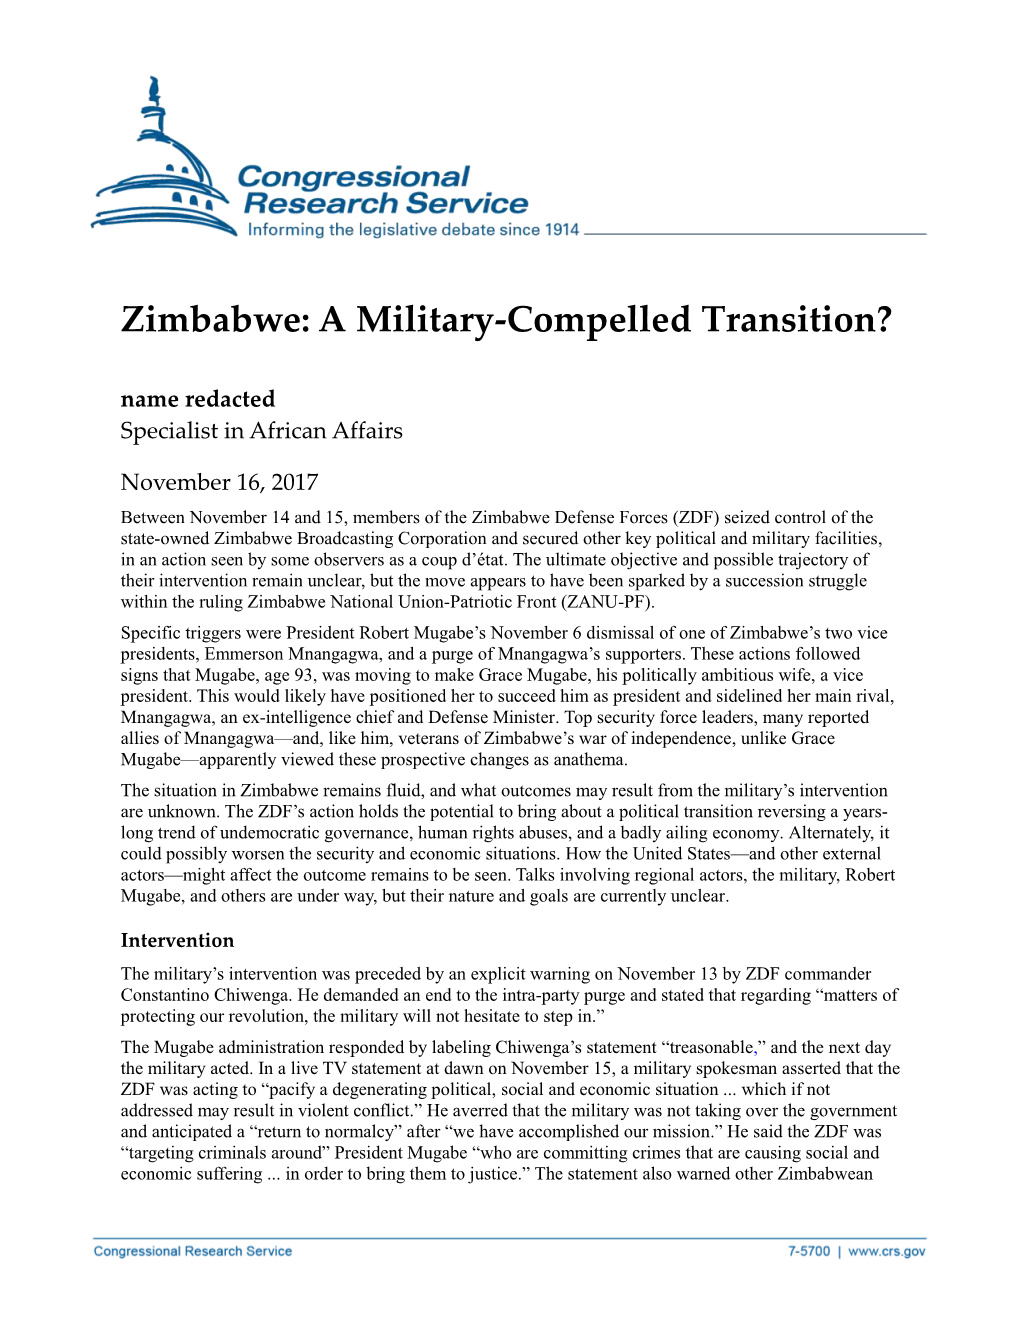 Zimbabwe: a Military-Compelled Transition? Name Redacted Specialist in African Affairs